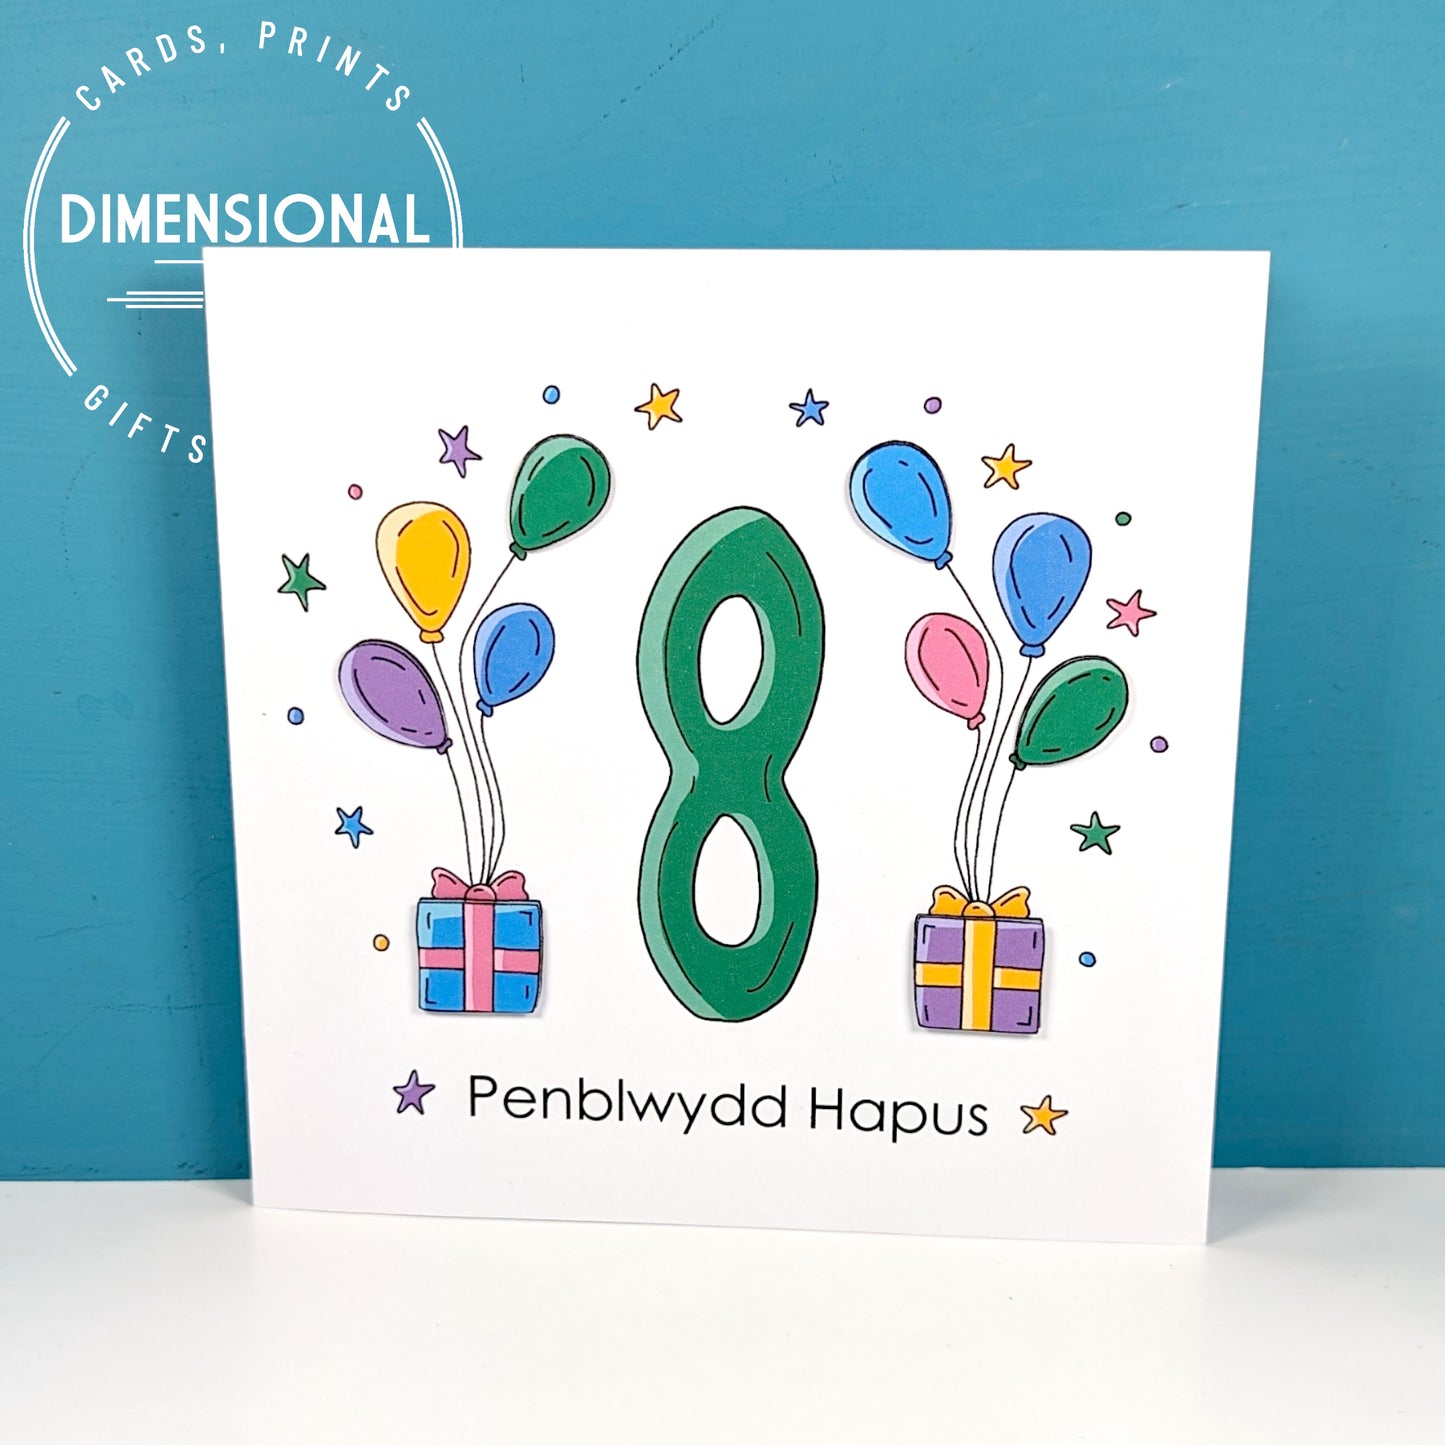 8th balloons and presents Penblwydd Hapus (Birthday) Card - Welsh